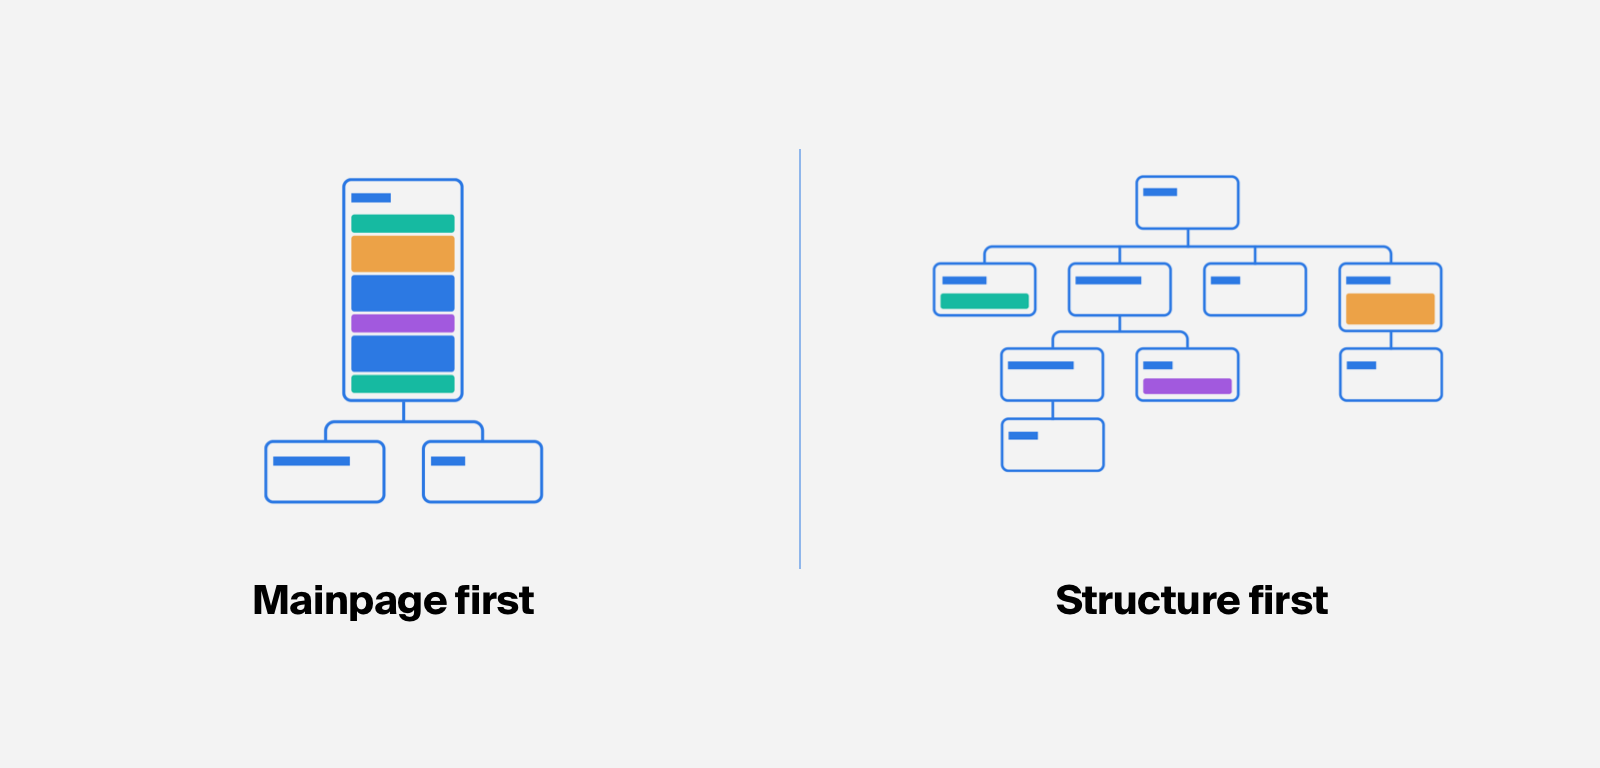 Octopus Mainpage first vs. Structure first